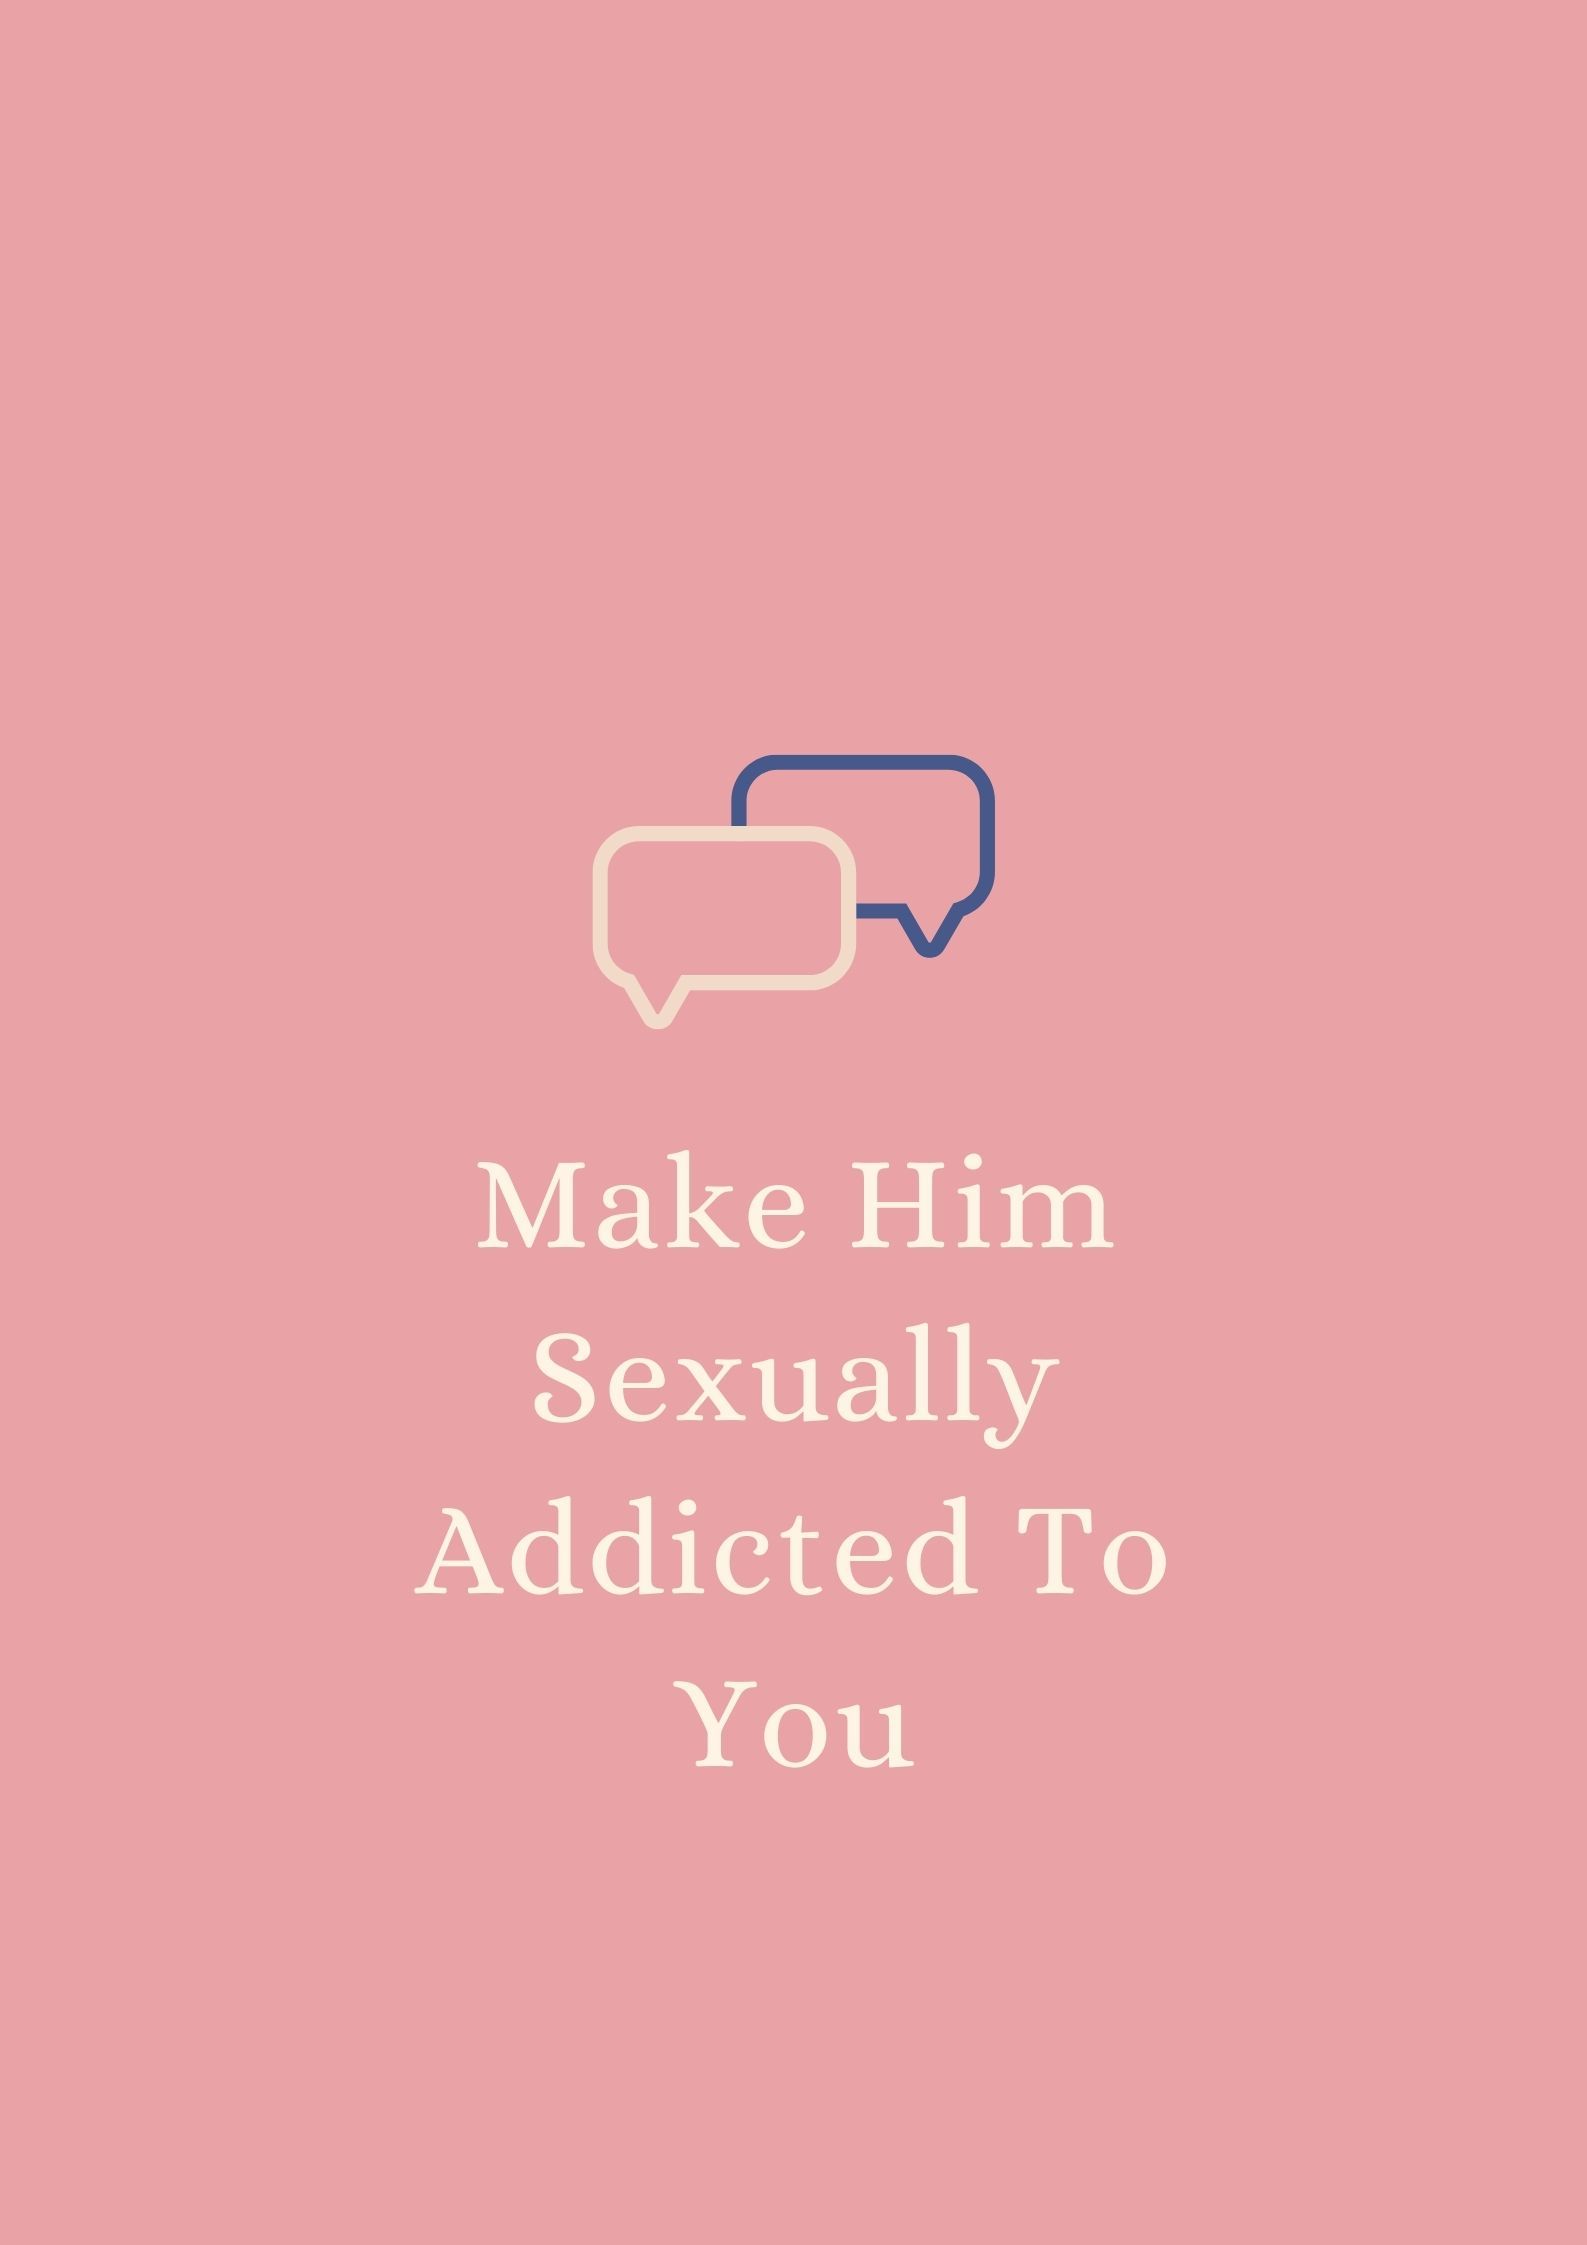 64 Wild Dirty Talk Examples To Make Him Sexually Addicted To You! (part 2)